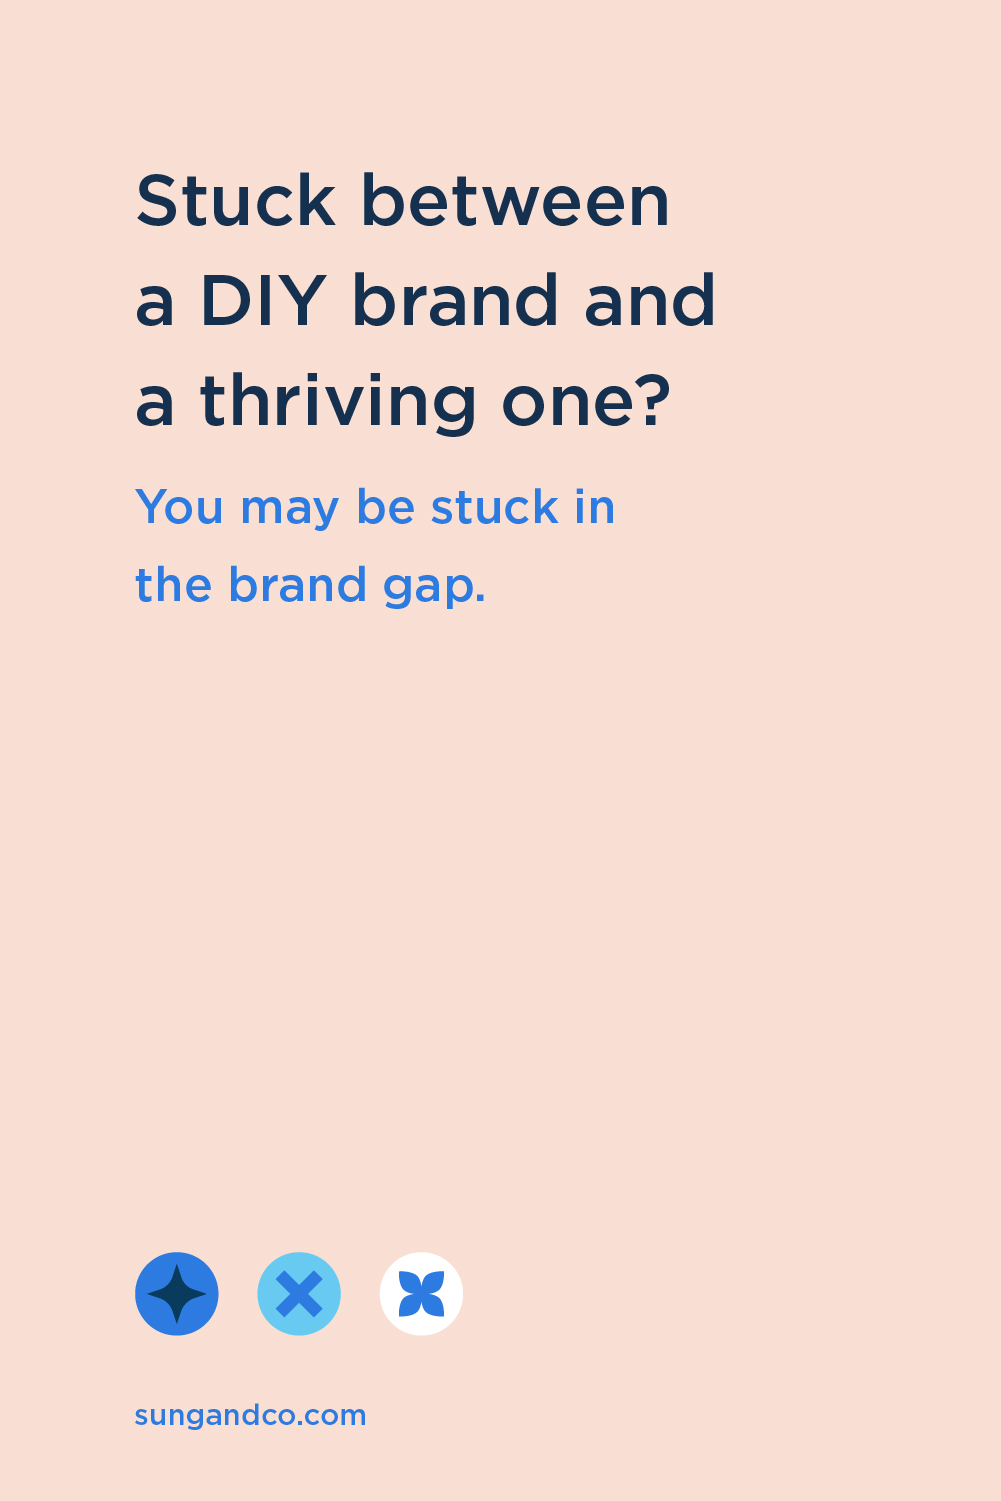 Stuck between a DIY brand and a thriving one? You might be stuck in the brand gap.